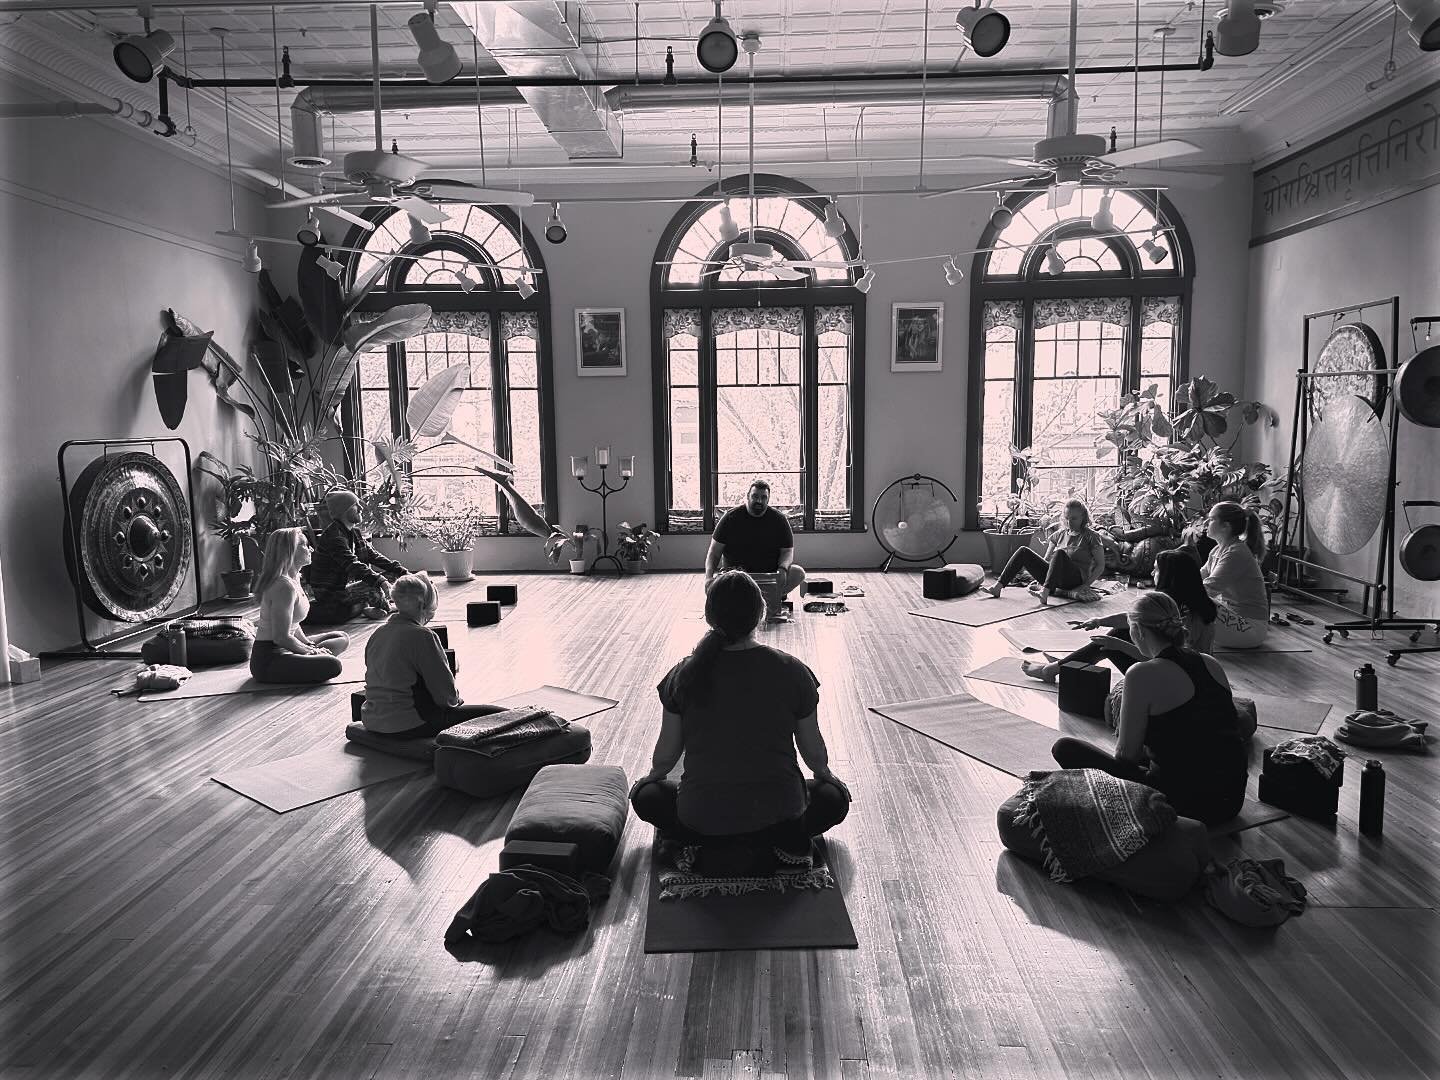 Yesterday we had our first Free Community Yin Class!

Join the next one on Thursday June 6 @ 11am 

❤️❤️❤️